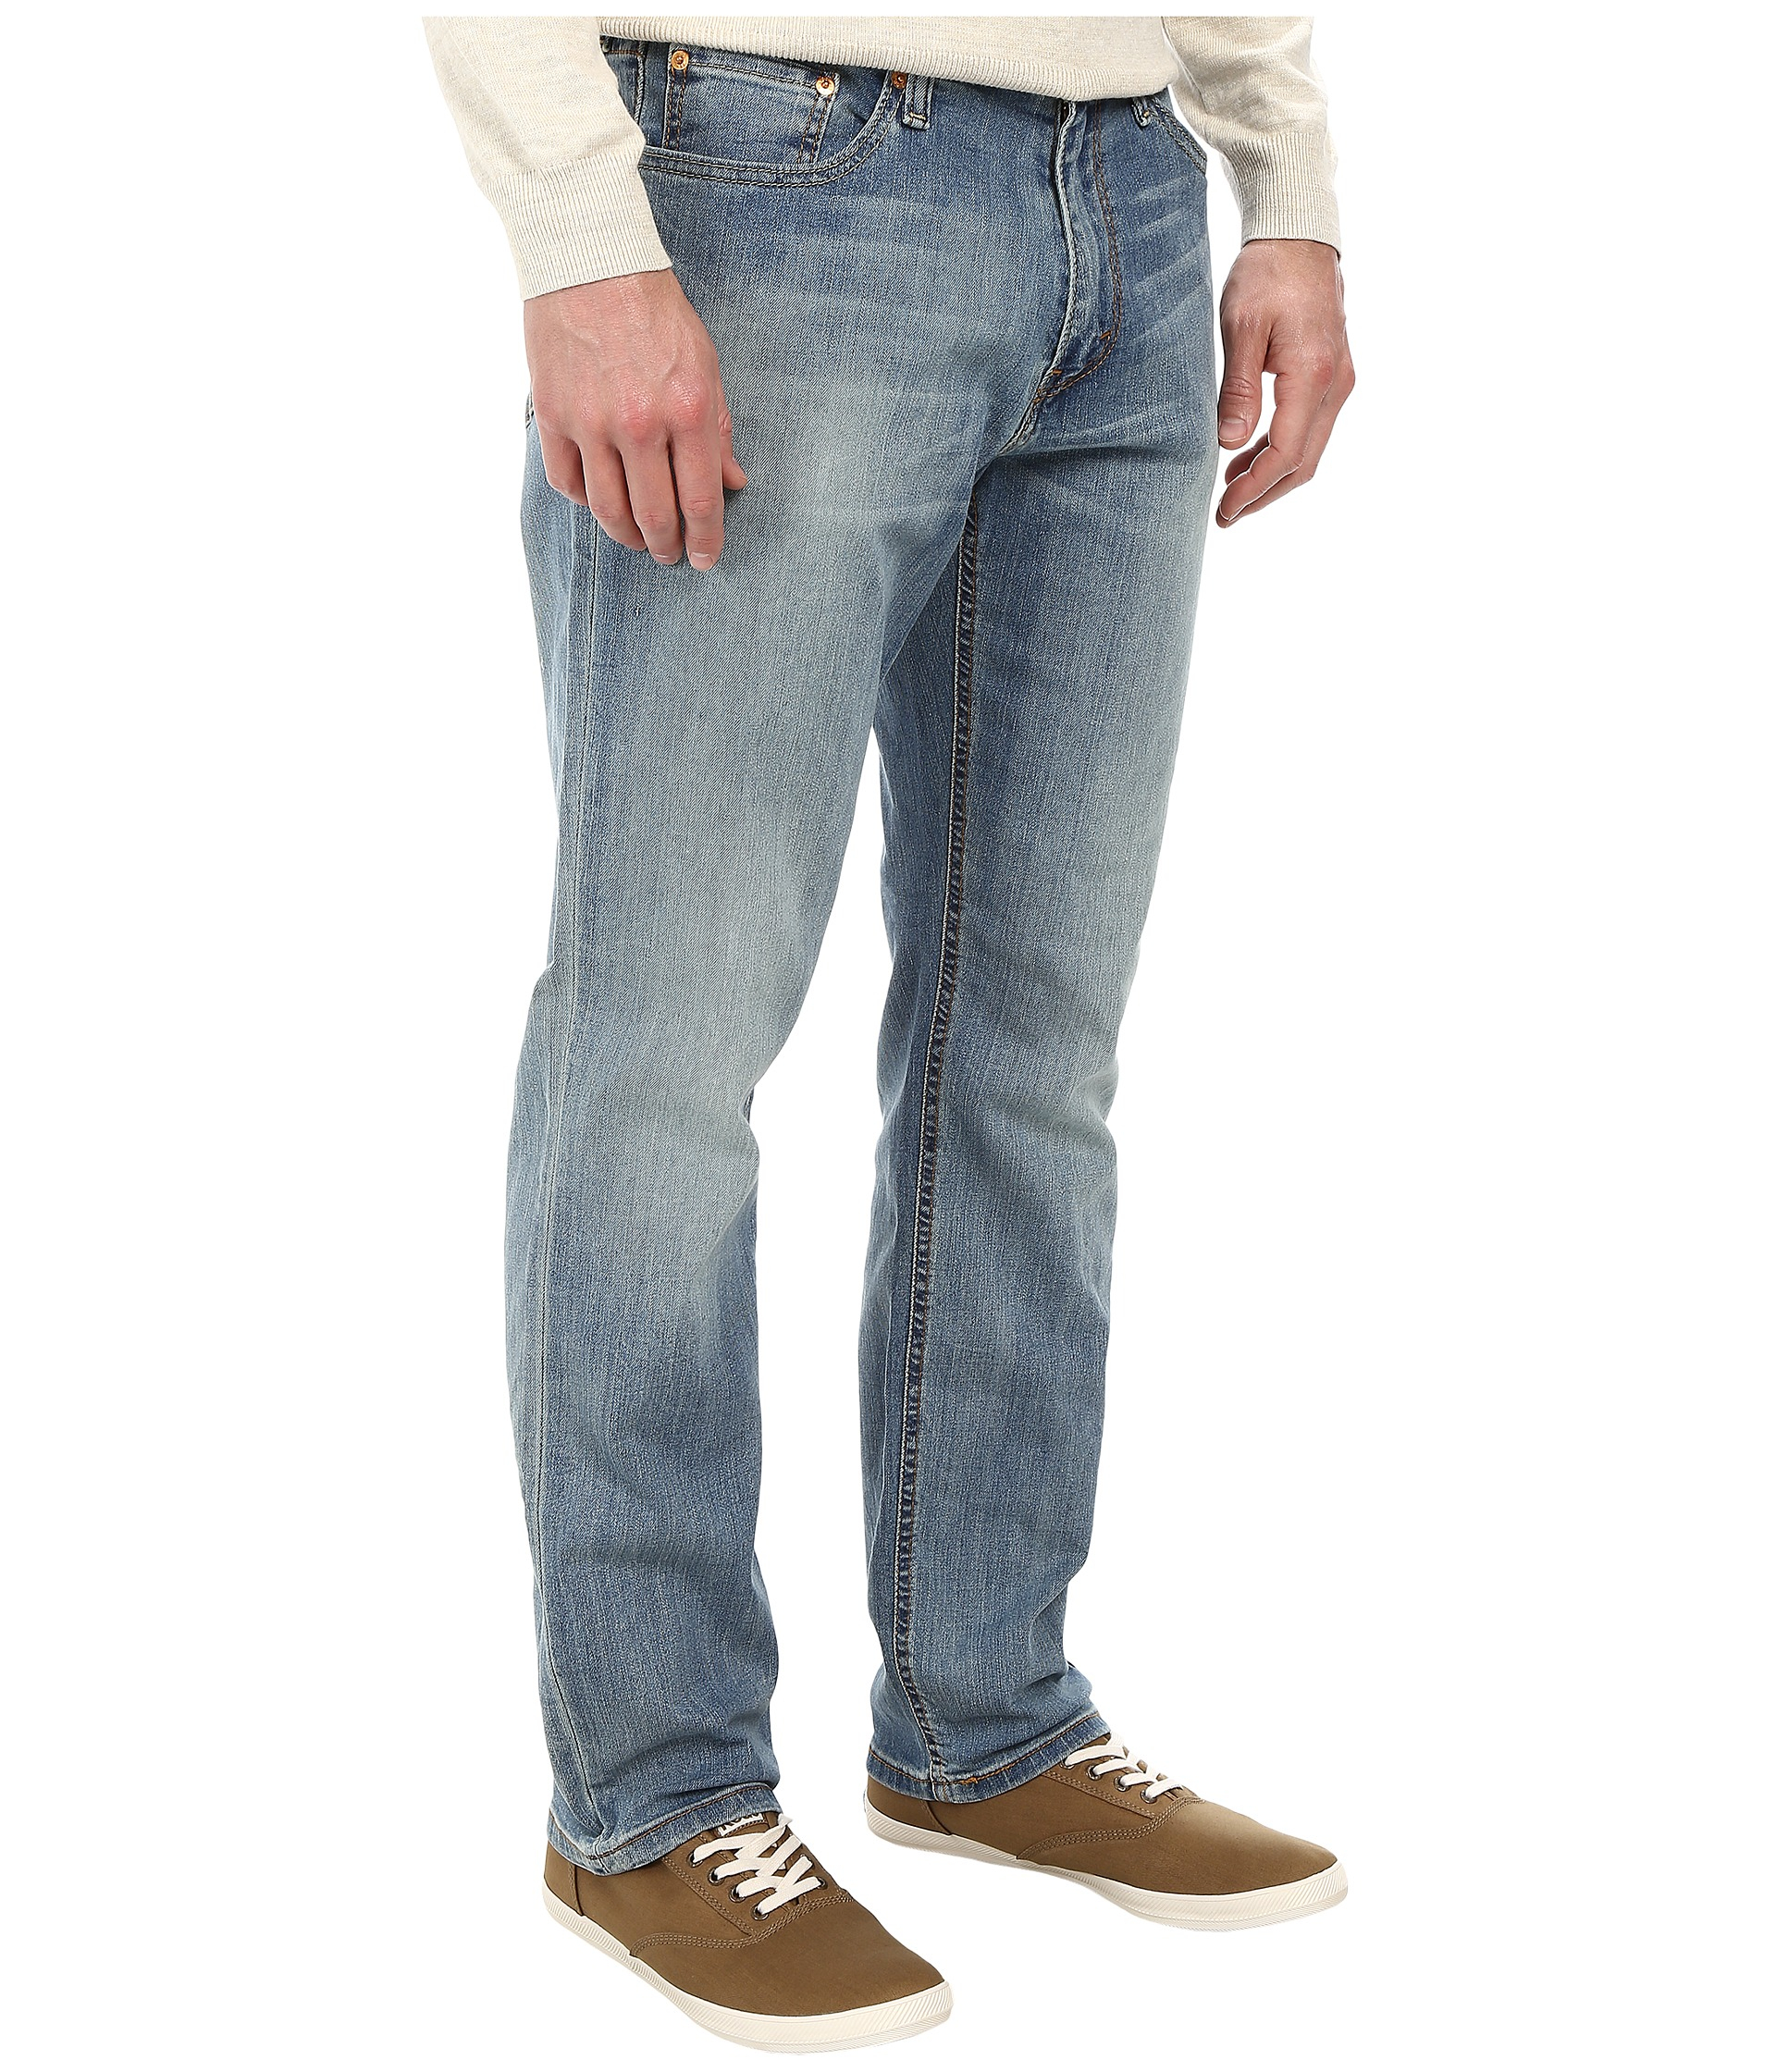 Lyst - Levi'S Levi ́s® 541 Athletic-fit Jeans in Blue for Men